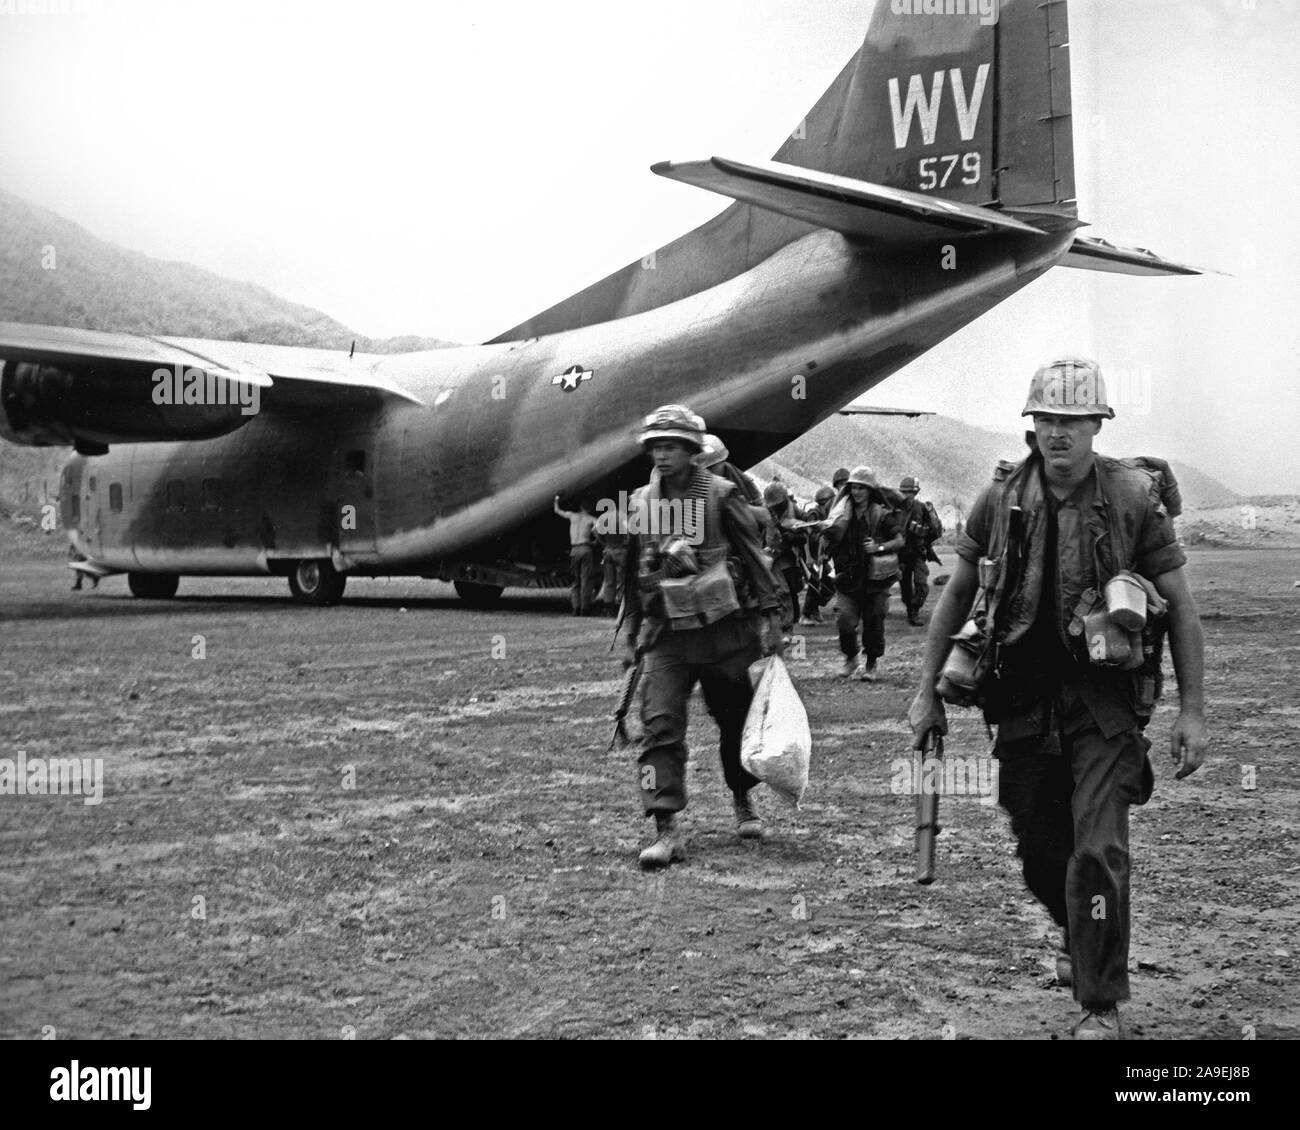 1968 - U.S. Marines head into combat after being airlifted to Calu by the C-123 Provider aircraft of the 311th Air Commando Squadron. Stock Photo